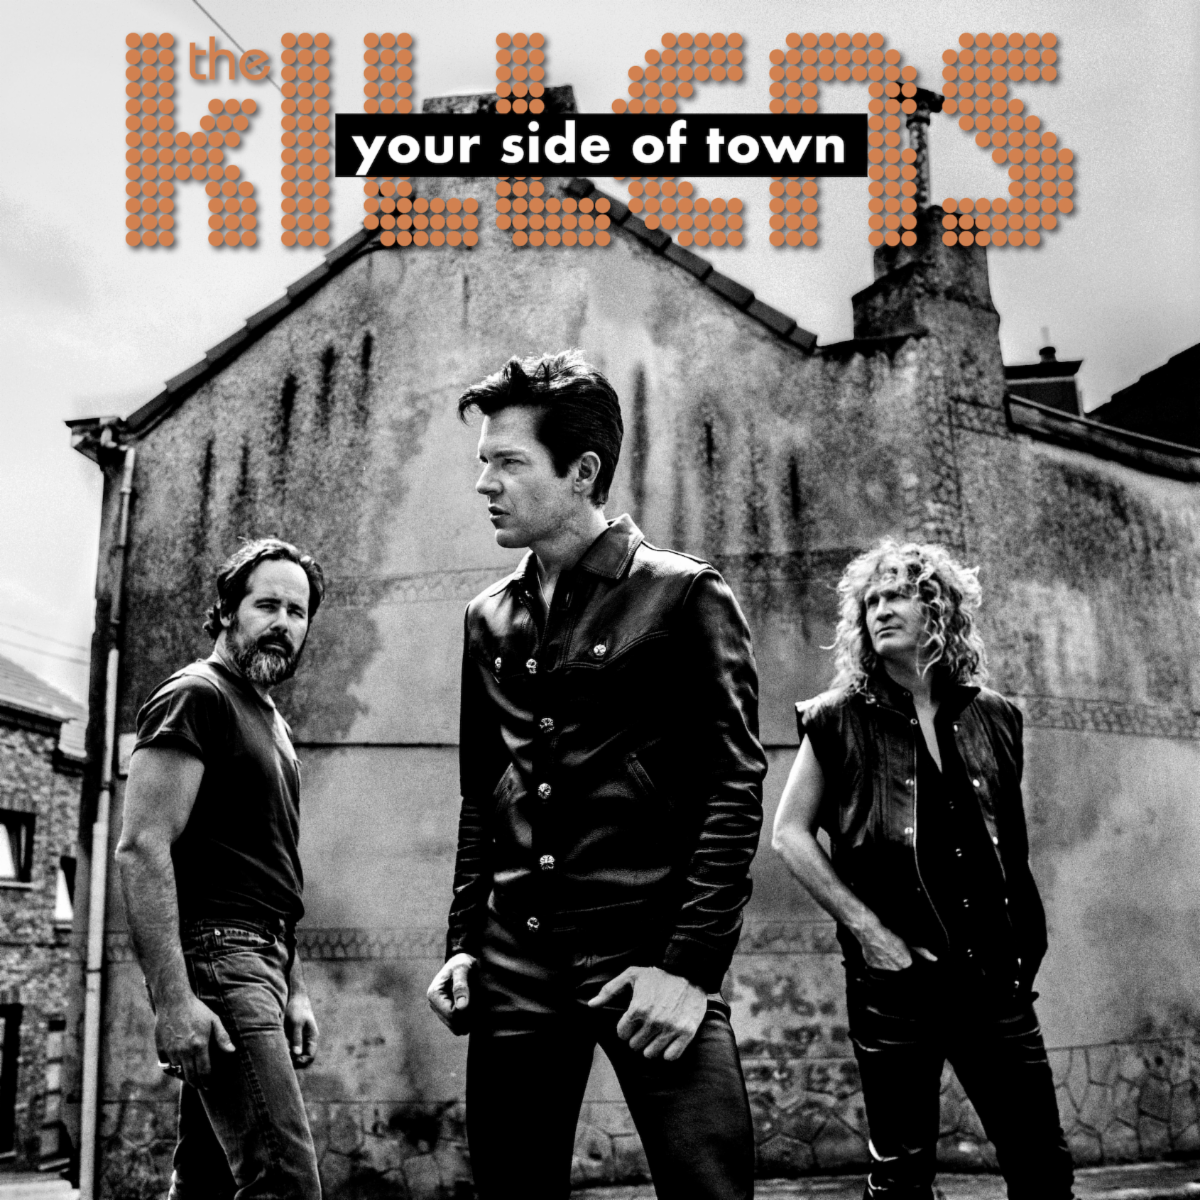 The Killers Release New Single “Your Side of Town”